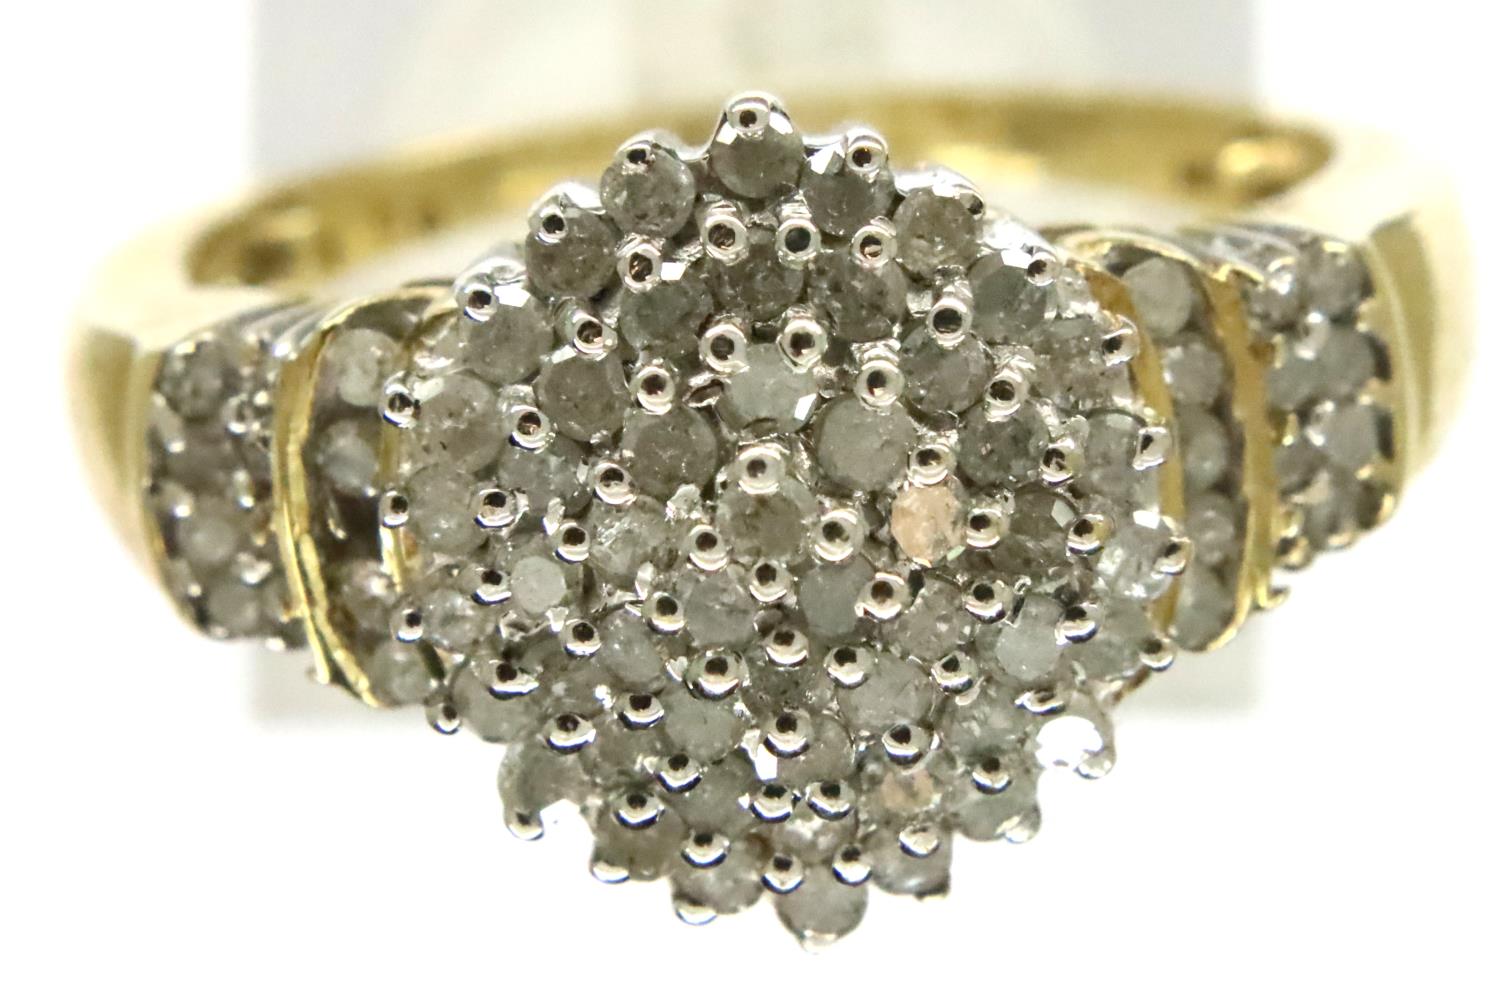 9ct gold diamond cluster dress ring with diamond shoulders, size V/W, 4.5g. P&P Group 1 (£14+VAT for